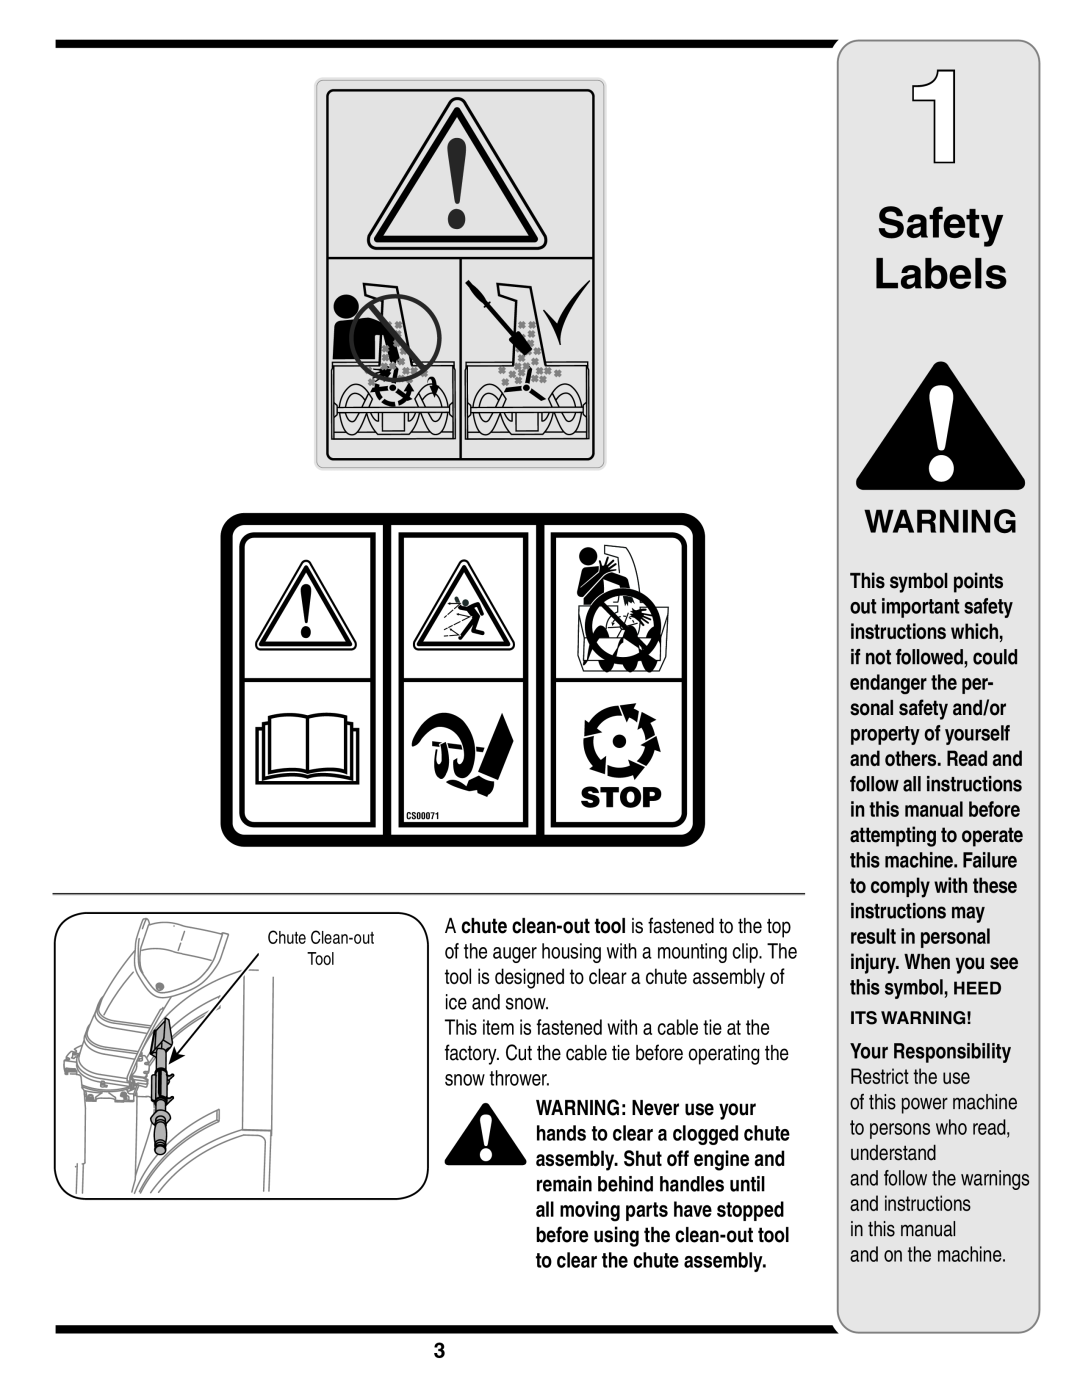 MTD Style L Safety Labels, in this manual and on the machine, ITS WARNING Your Responsibility Restrict the use 